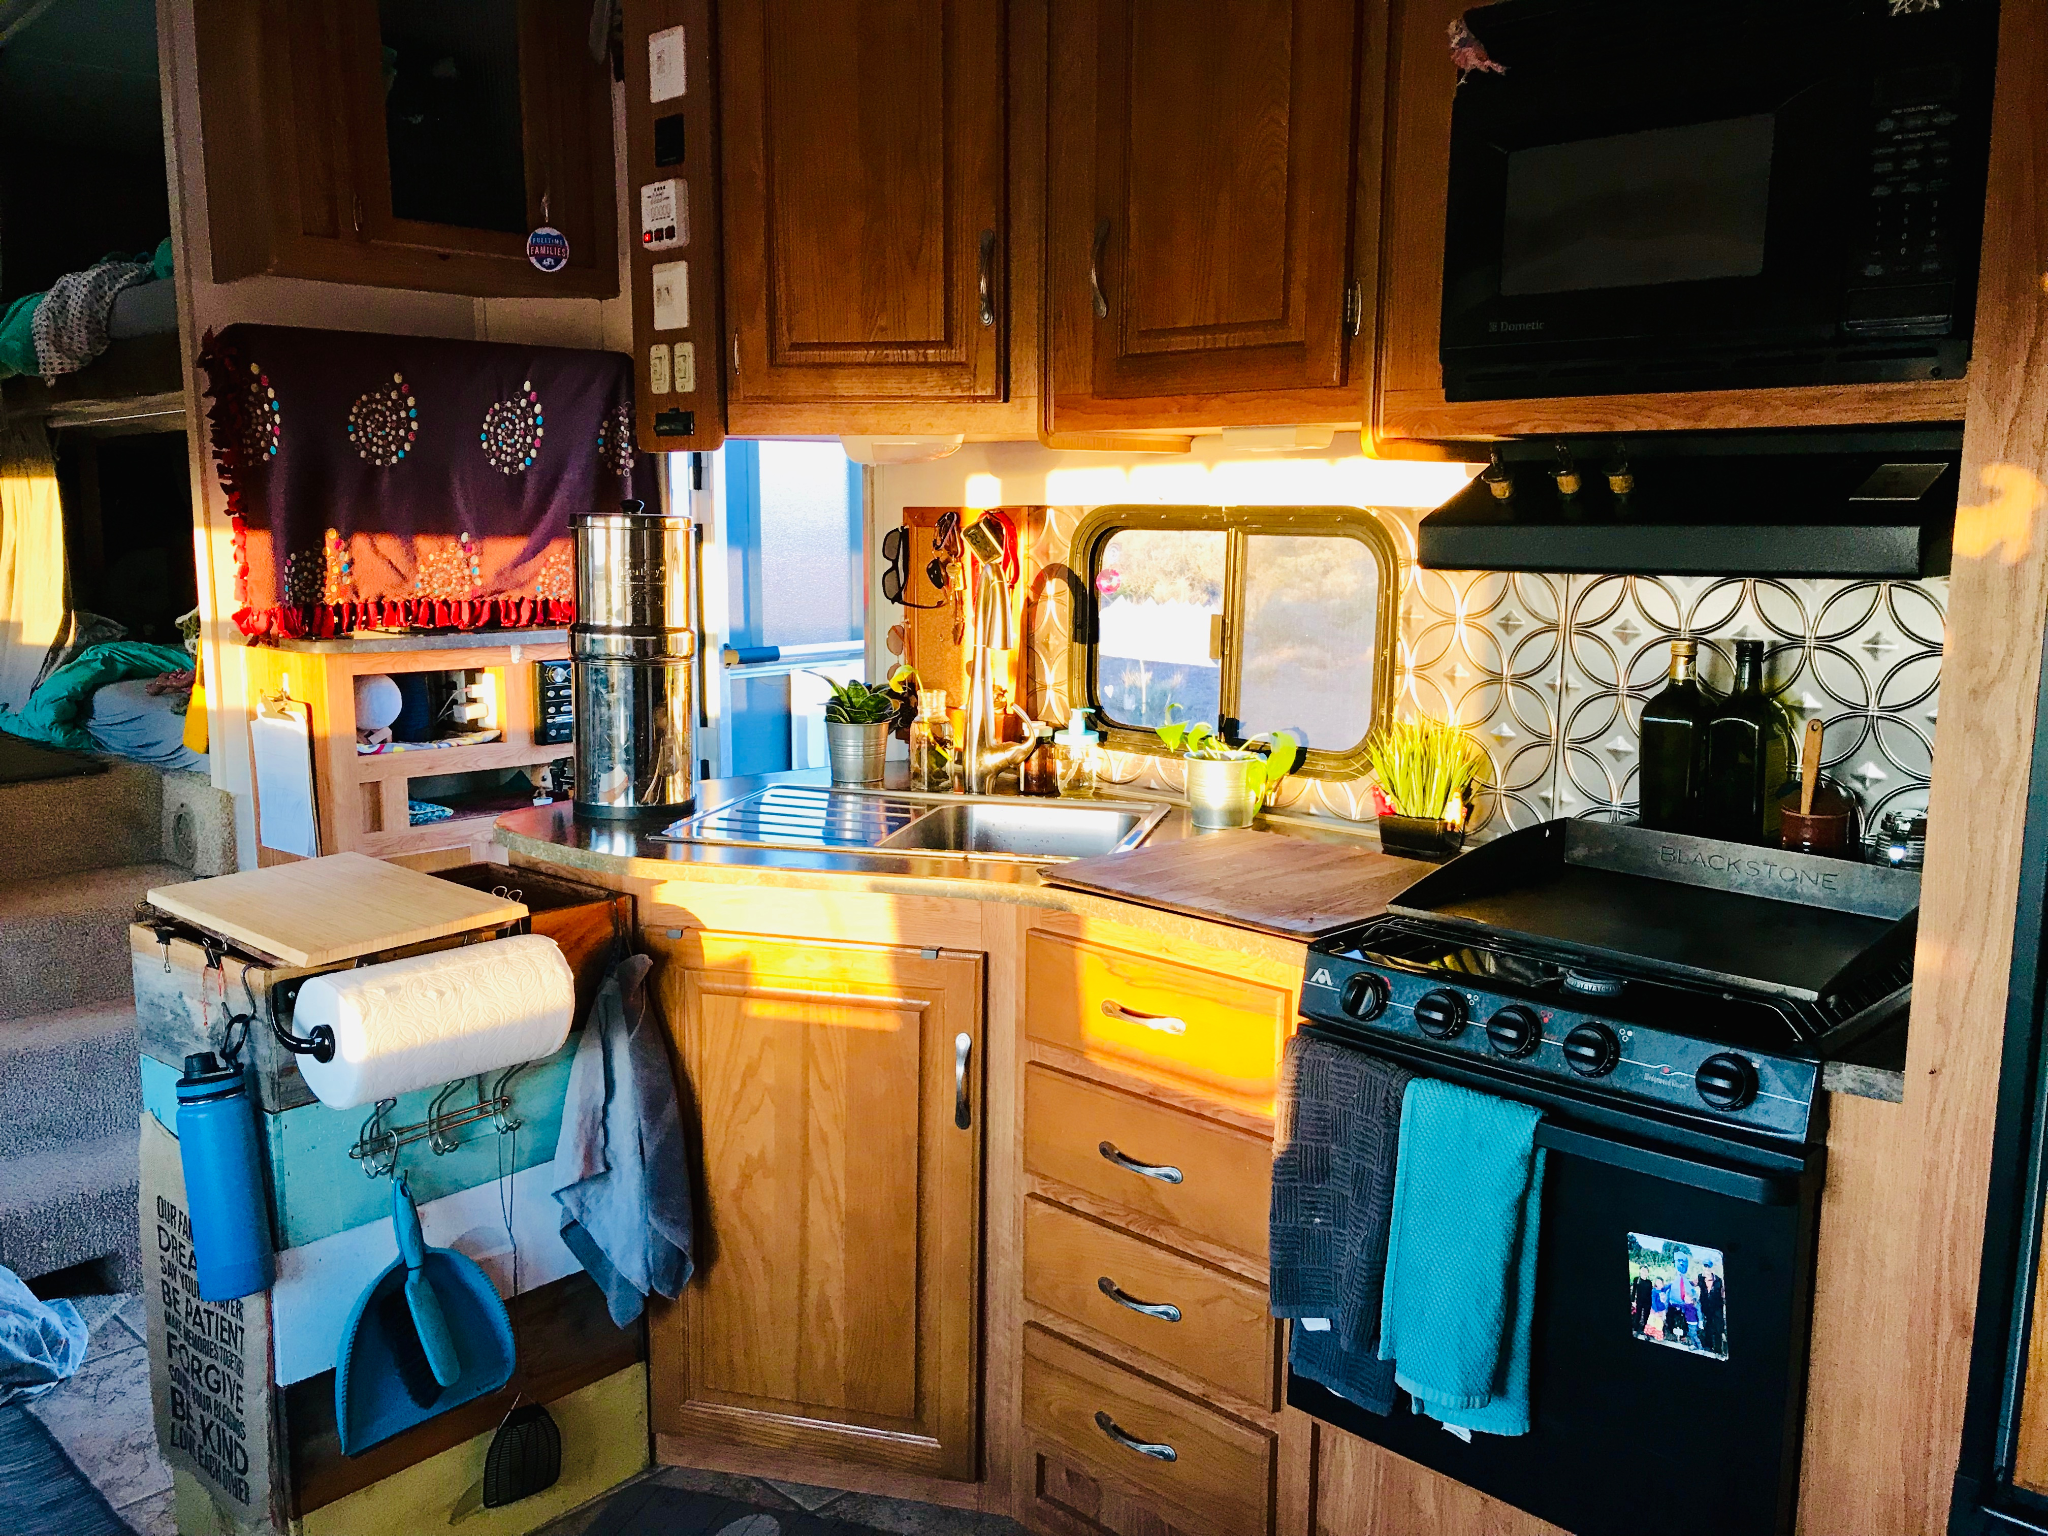 How to Get Rid of Bad Smell in the RV